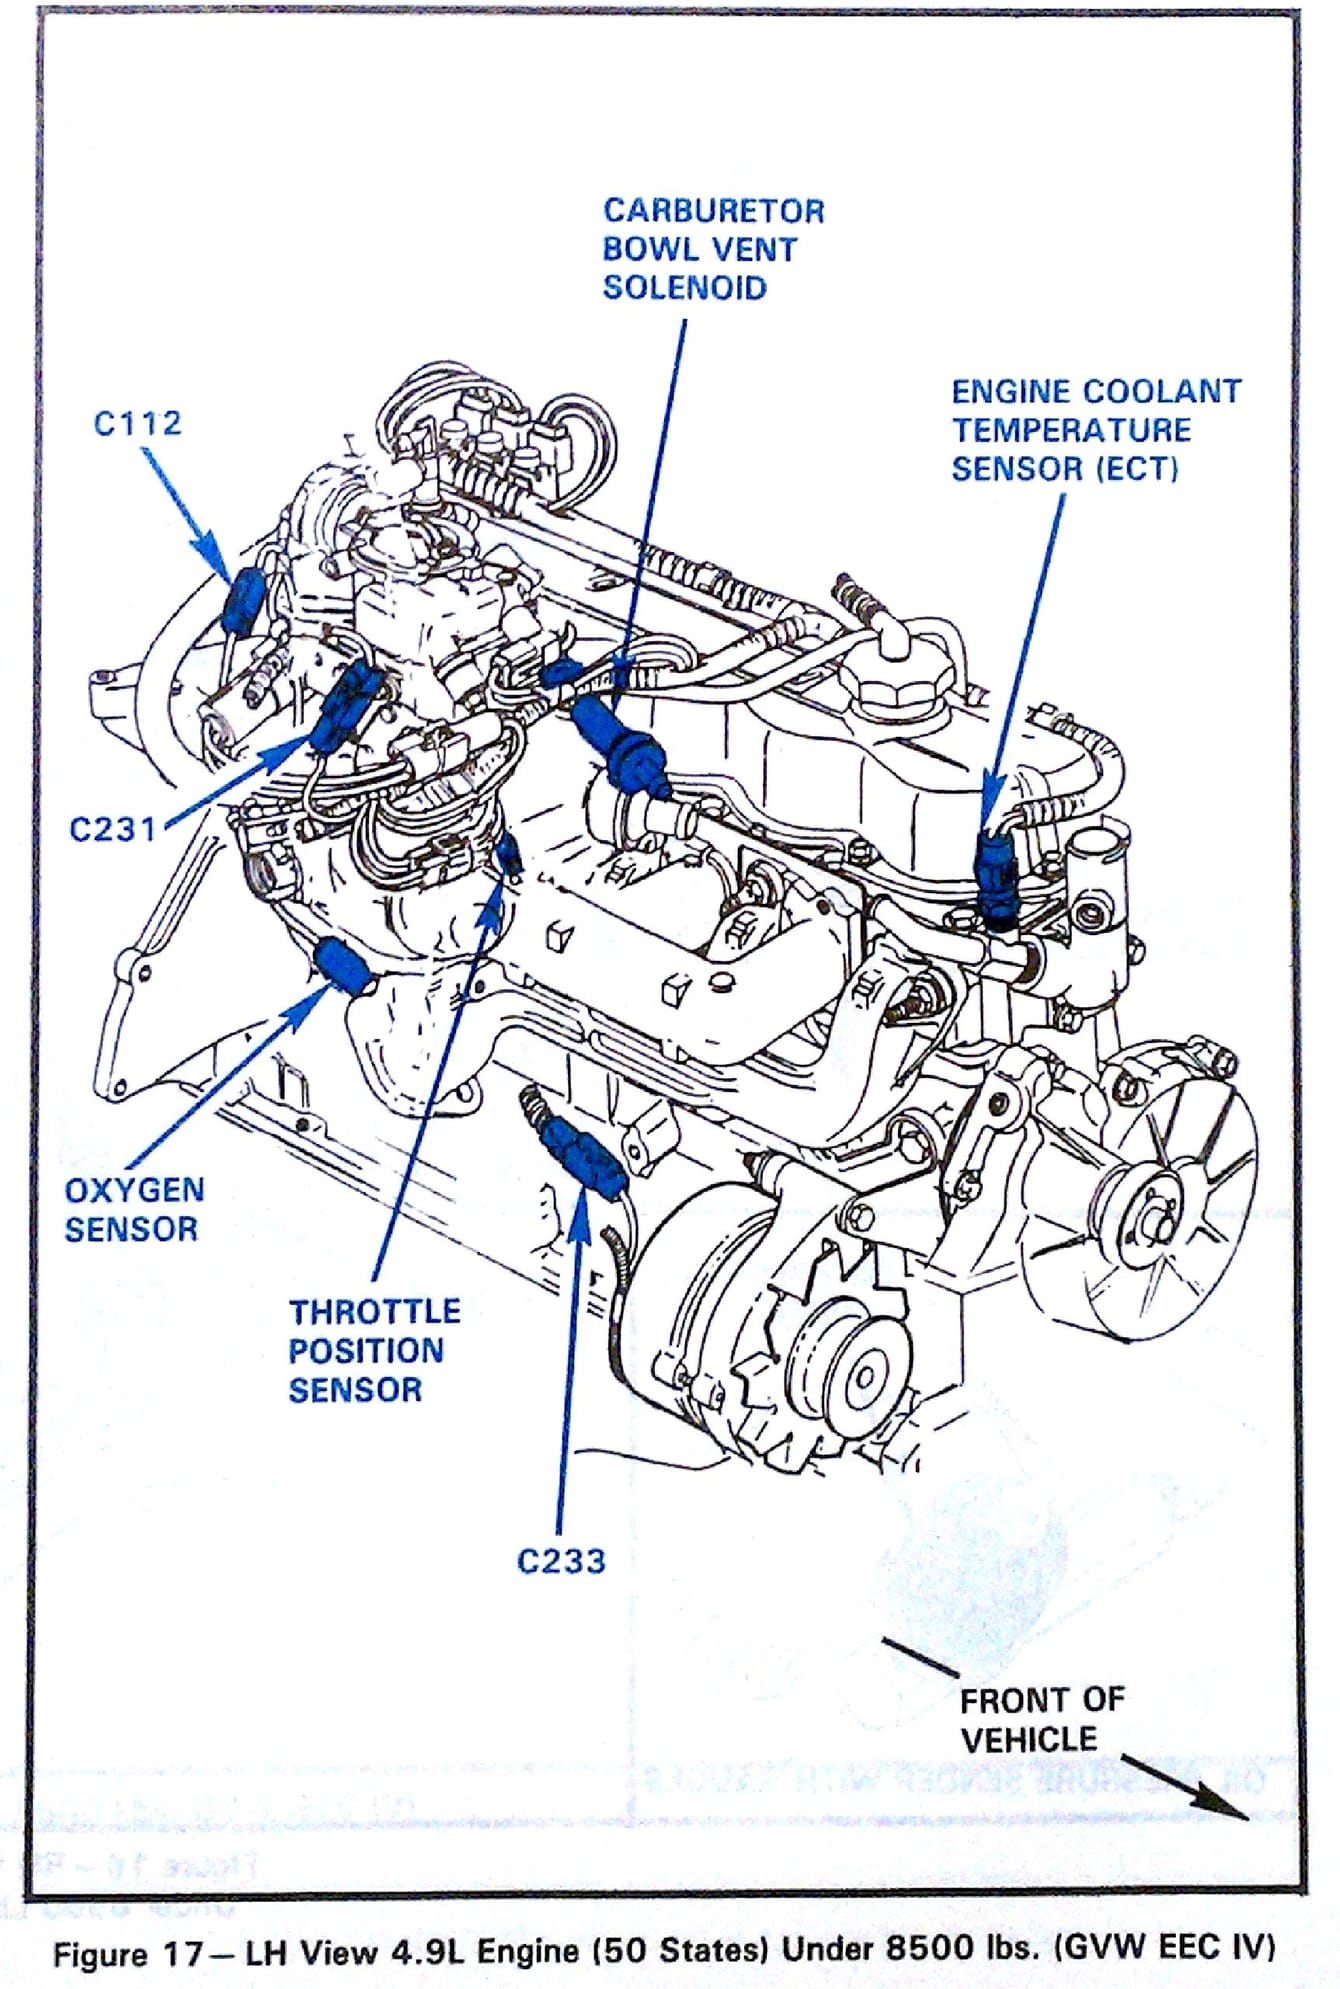 1985 ford f150 300 inline 6 smog help - Ford Truck ... 2000 jeep wrangler wiring diagrams 